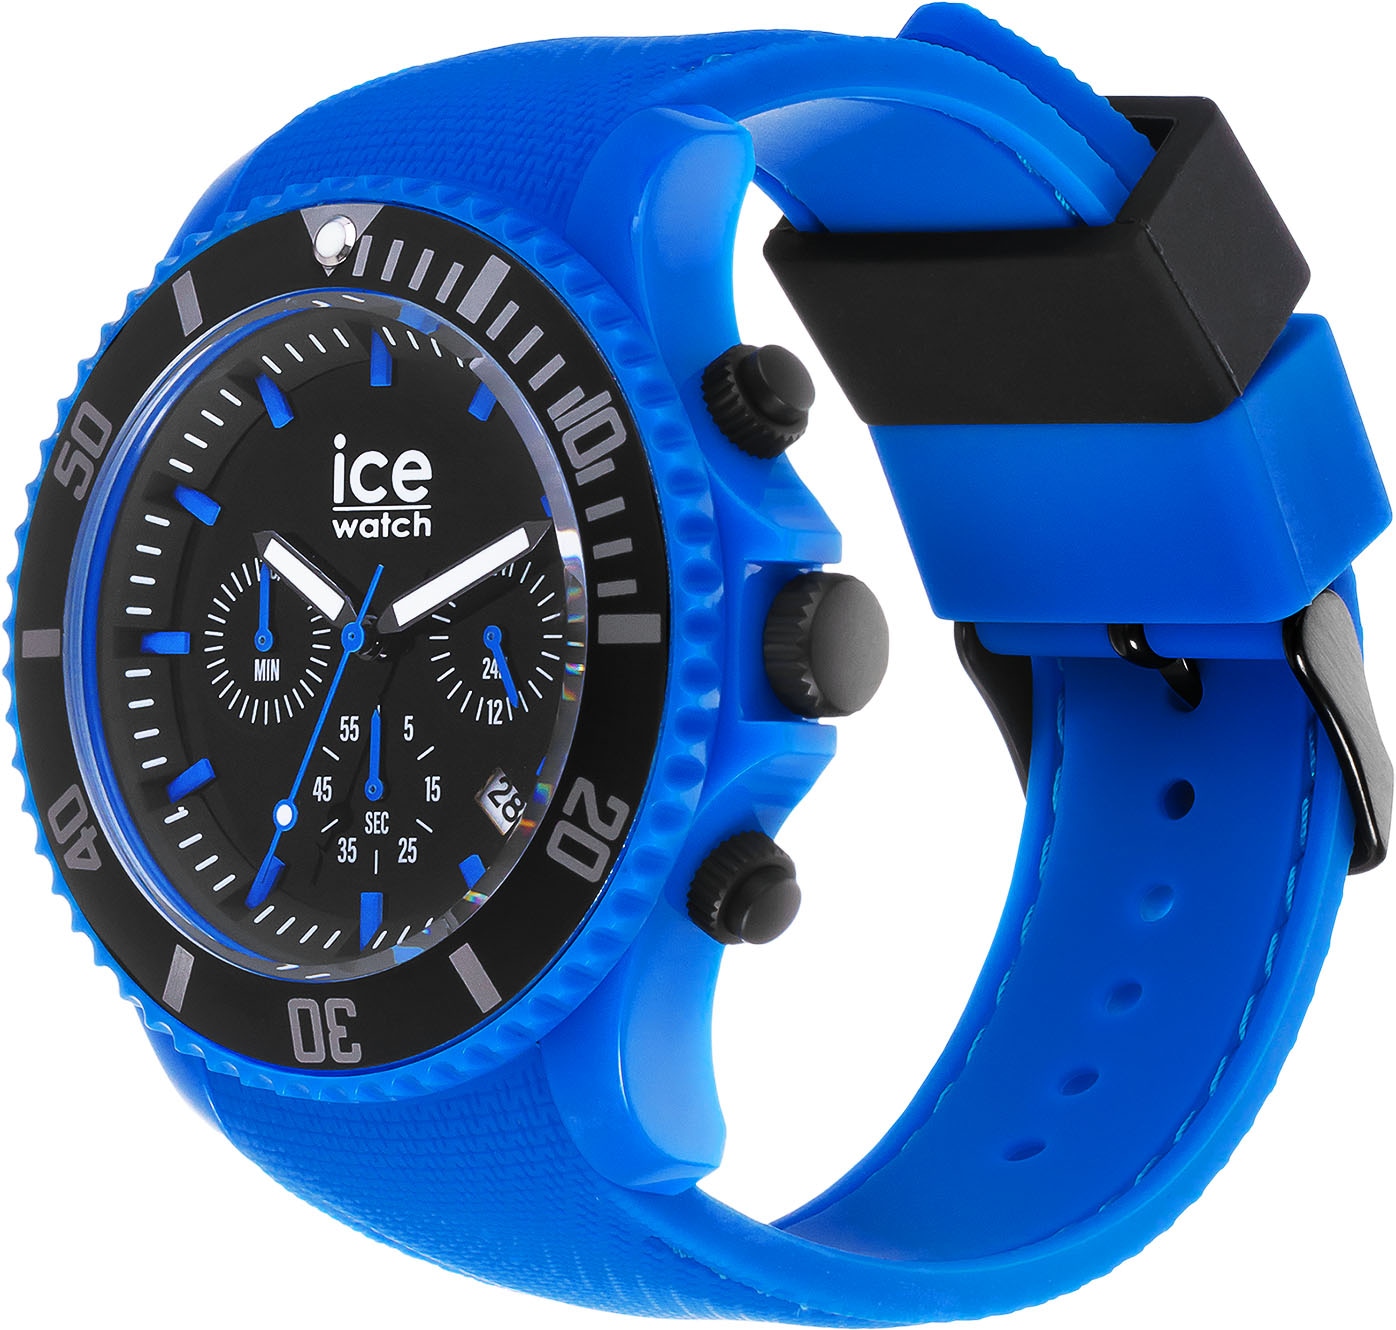 bei »ICE chrono Large OTTO blue CH, ice-watch Chronograph - shoppen Neon 019840« - - online